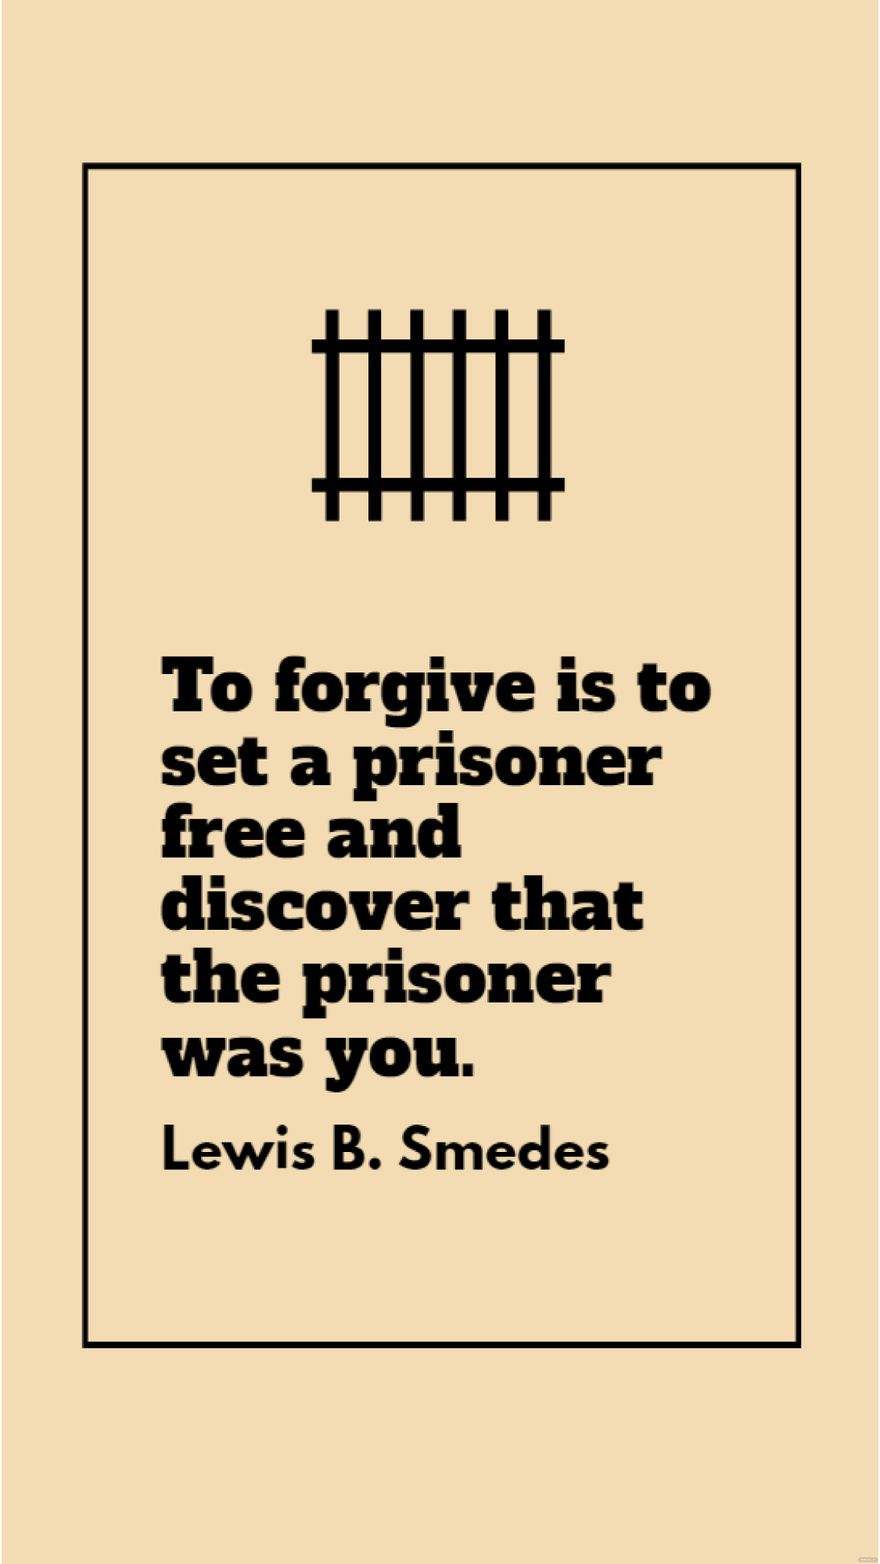 Free Lewis B. Smedes - To forgive is to set a prisoner and discover that the prisoner was you. in JPG